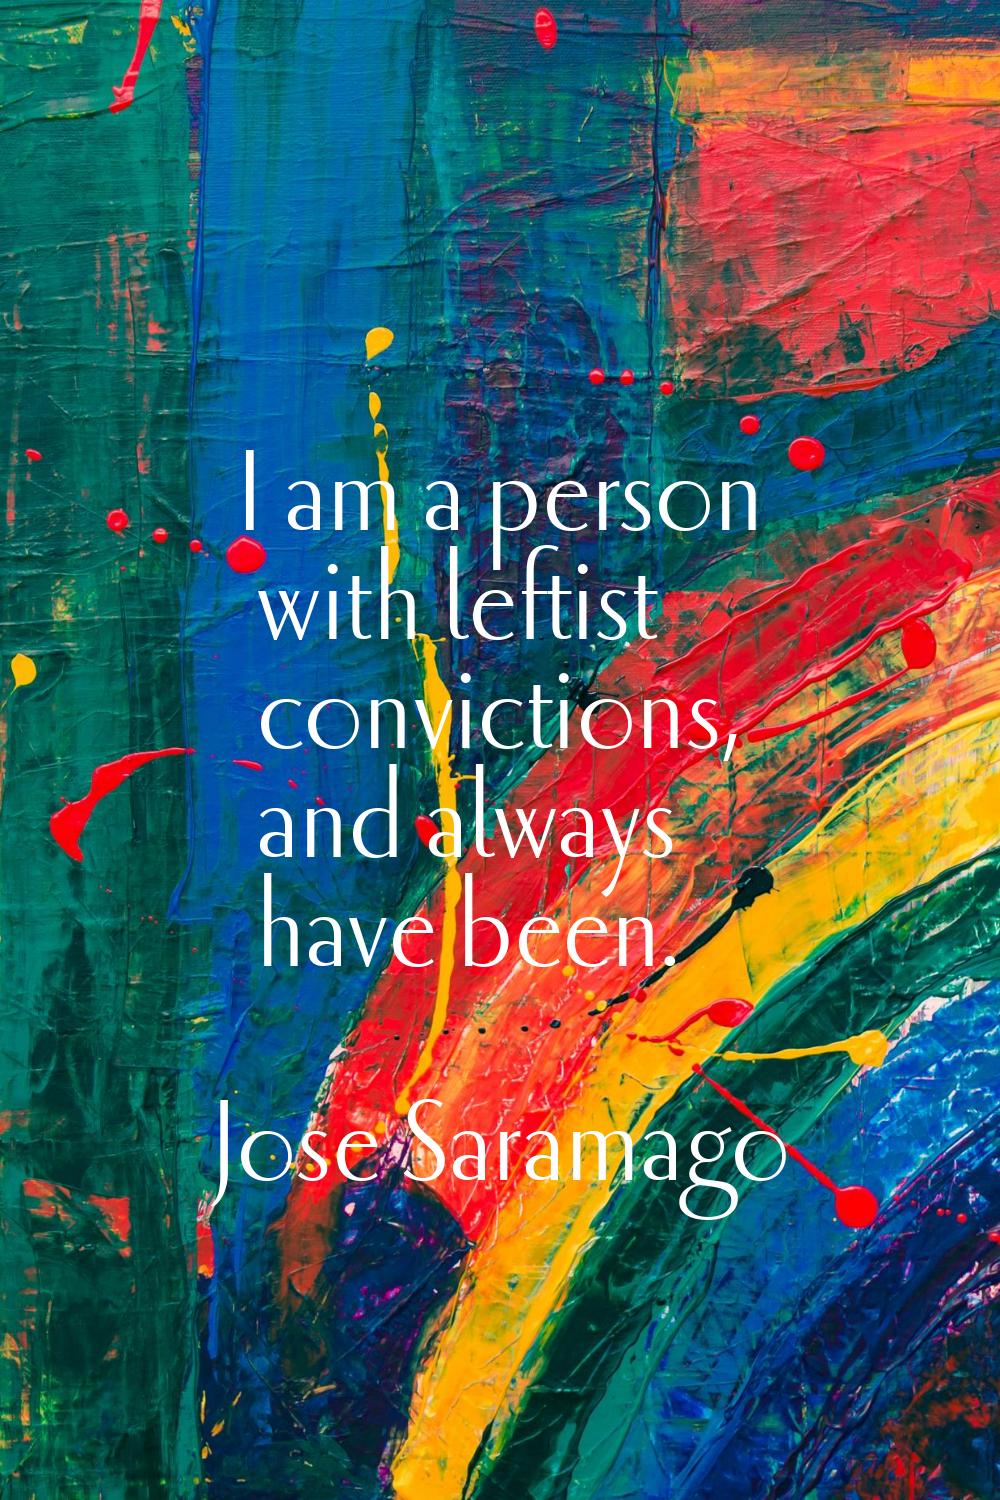 I am a person with leftist convictions, and always have been.